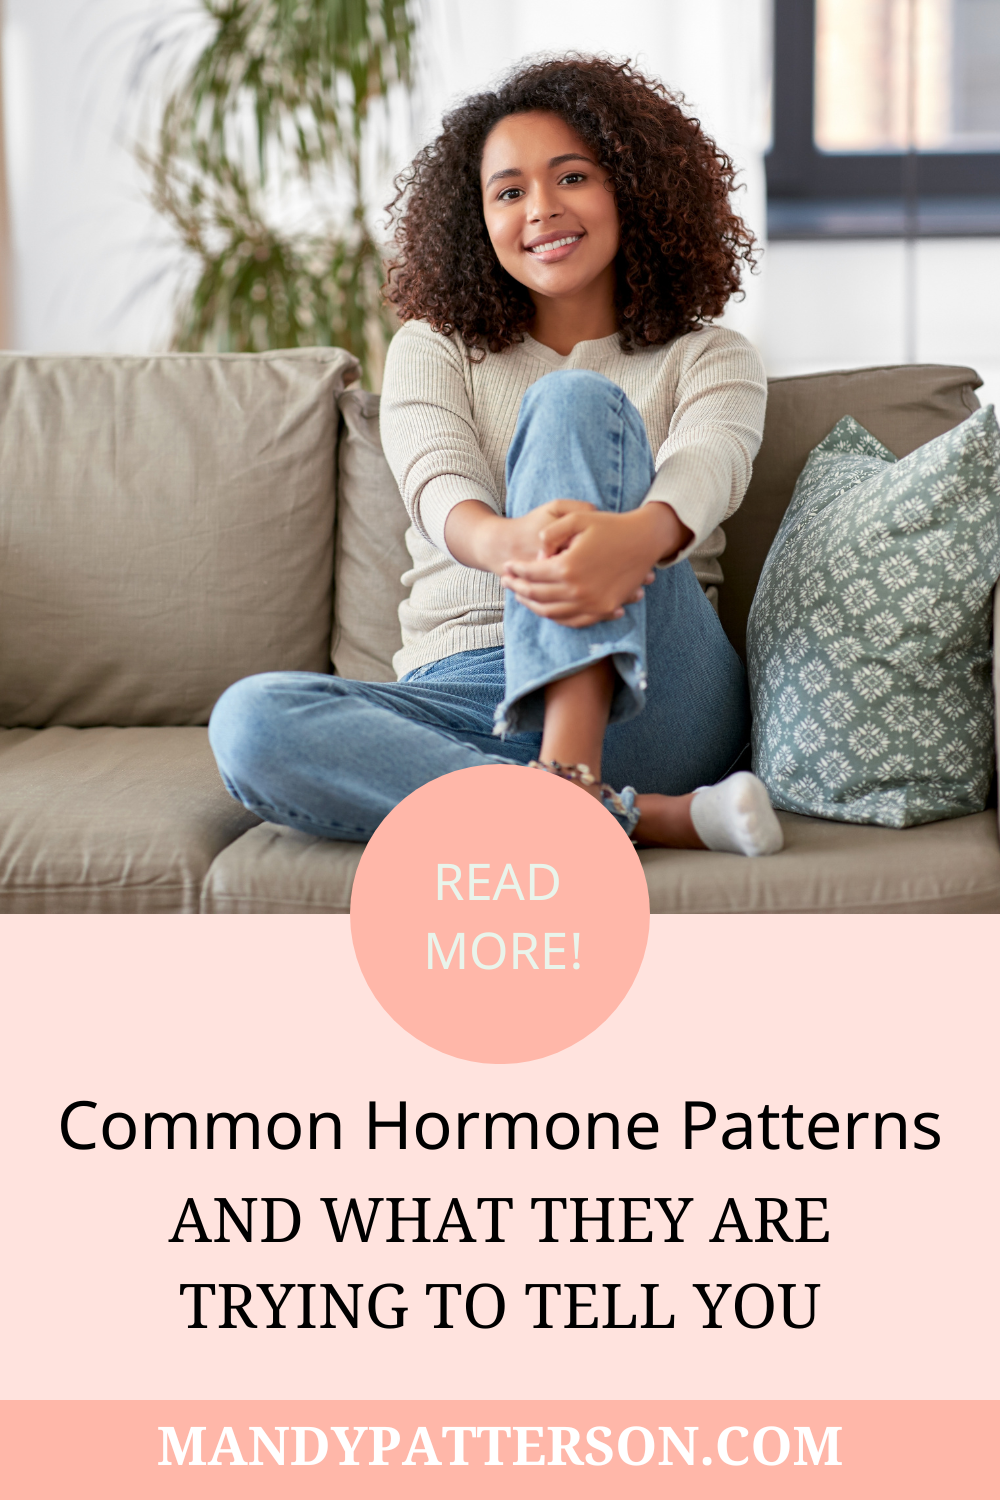 Common Hormone Patterns and What They Are Trying to Tell You